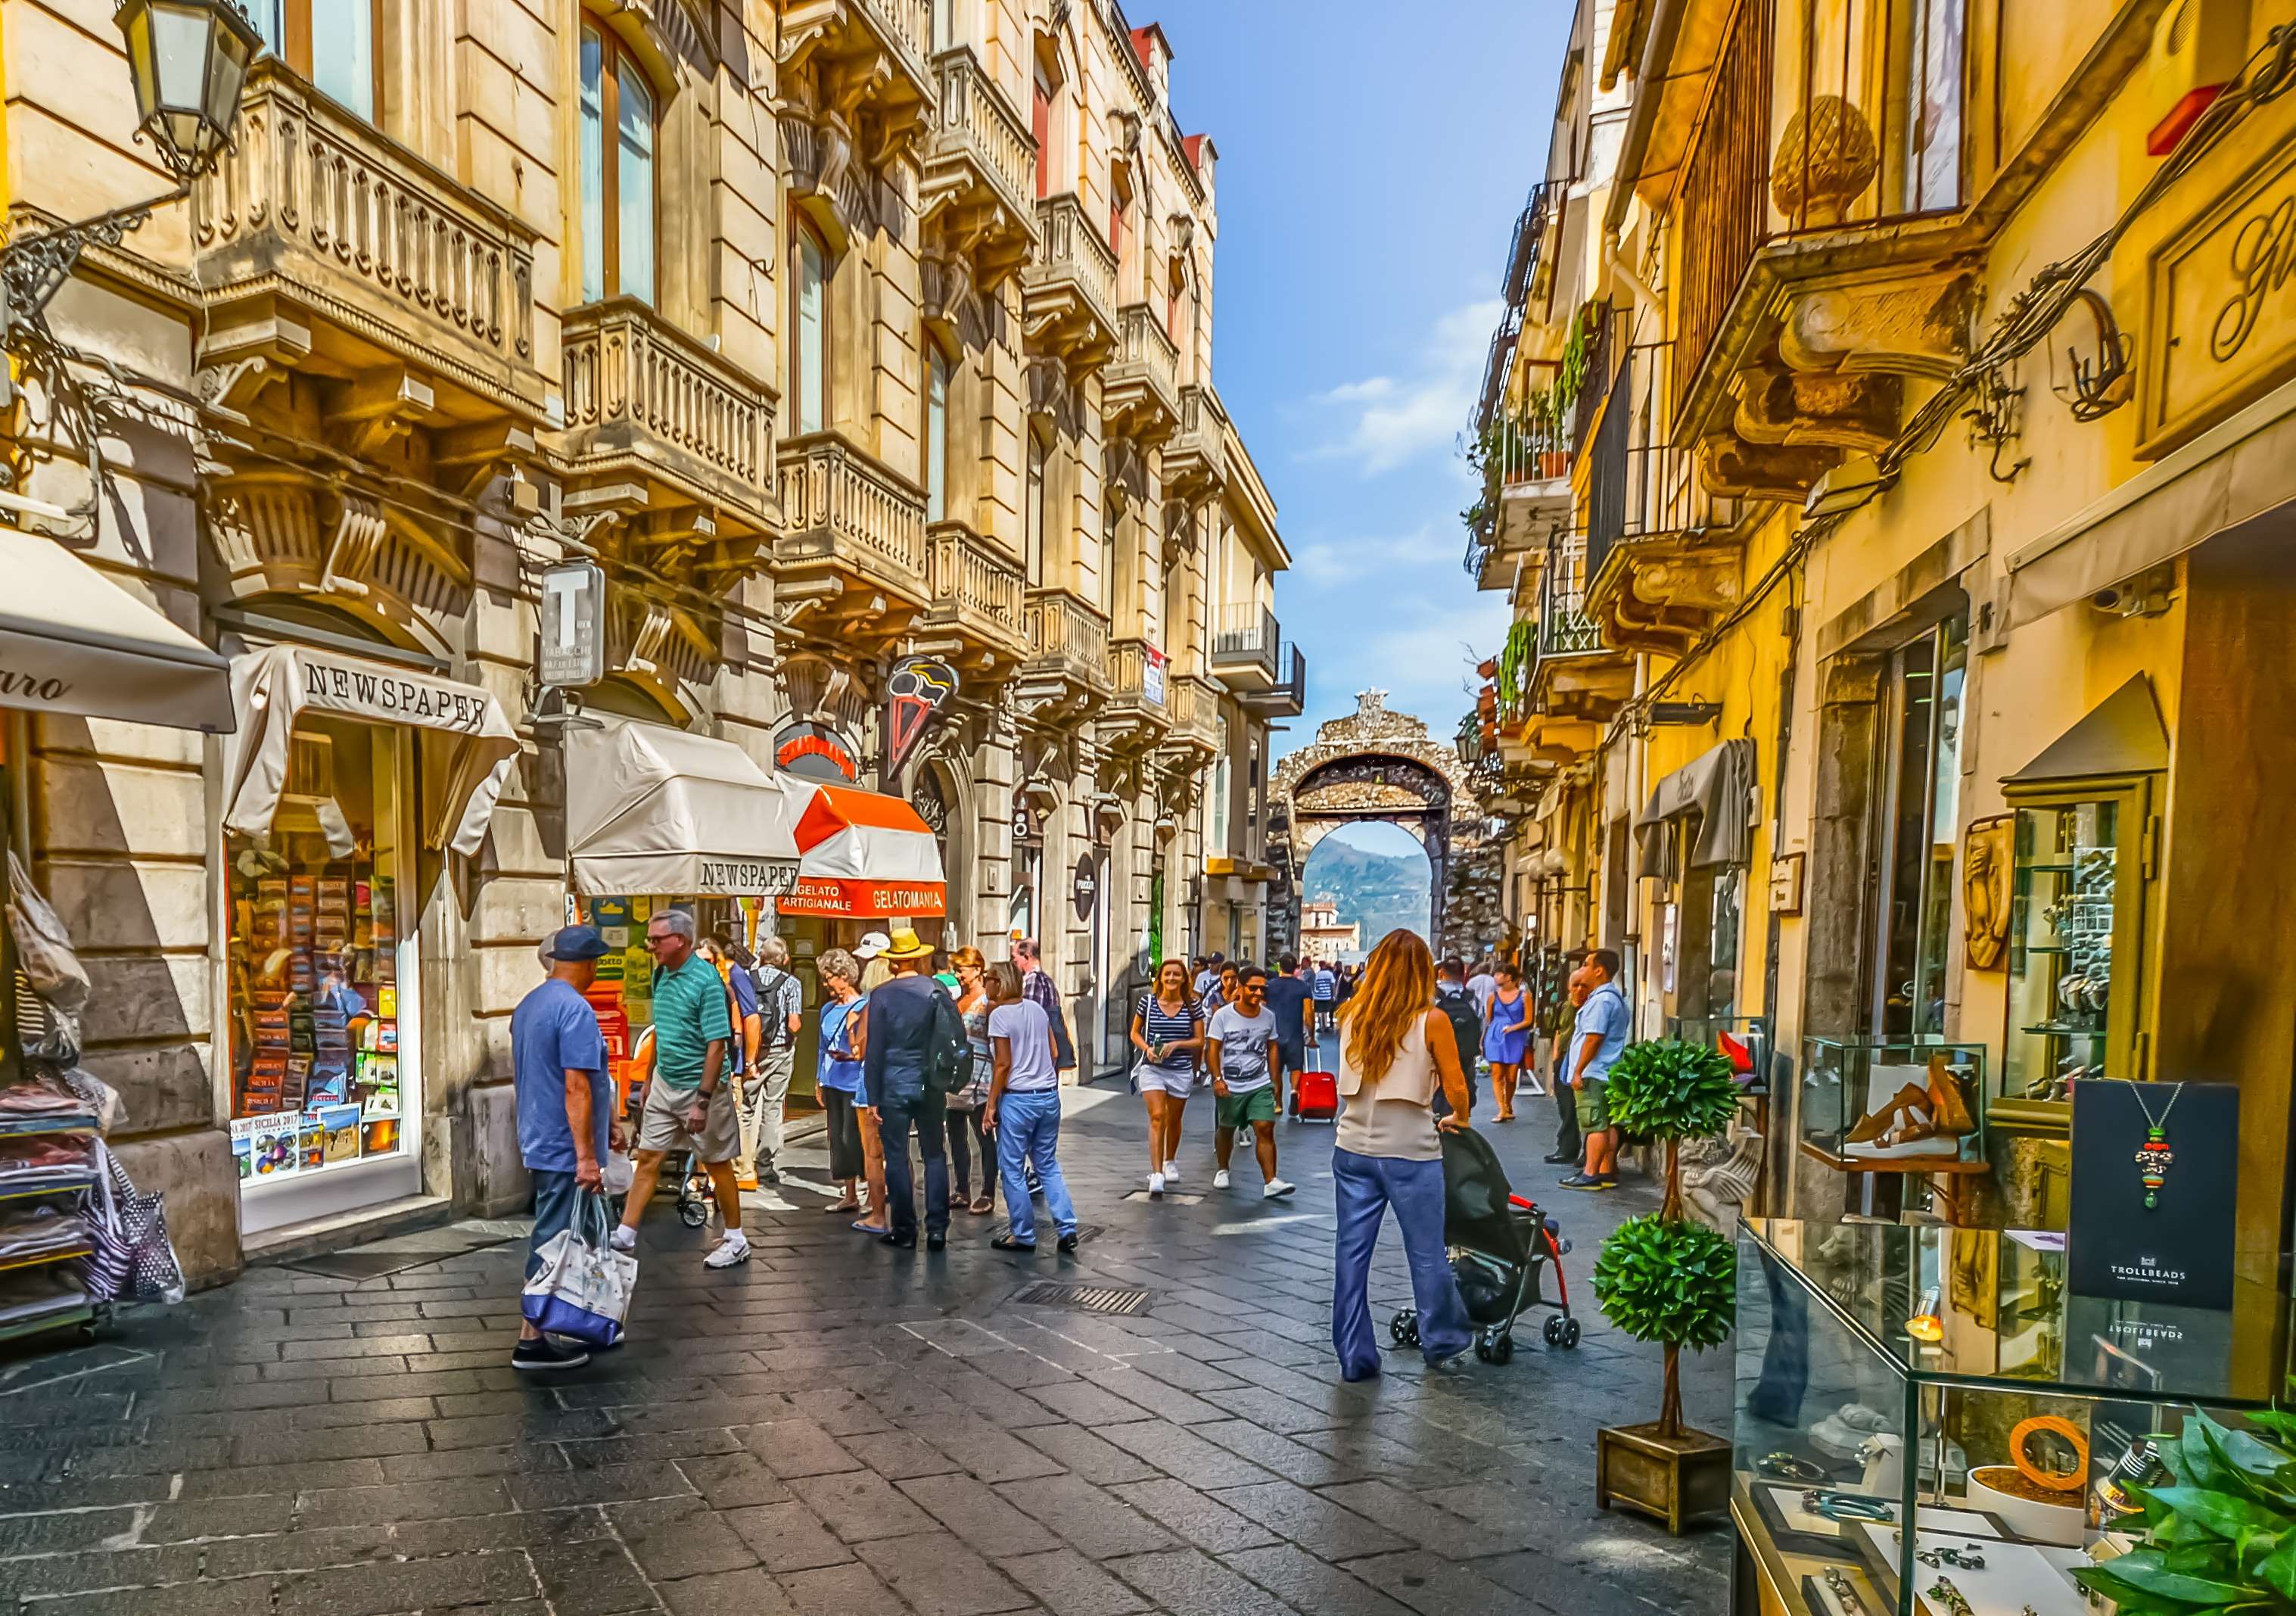 architecture, city, colorful, italian, italy, old, scene, shopping, shops, sicilian, sicily, street, taormina, tourism, travel, view, village wallpaper. Mocah.org HD Wallpaper